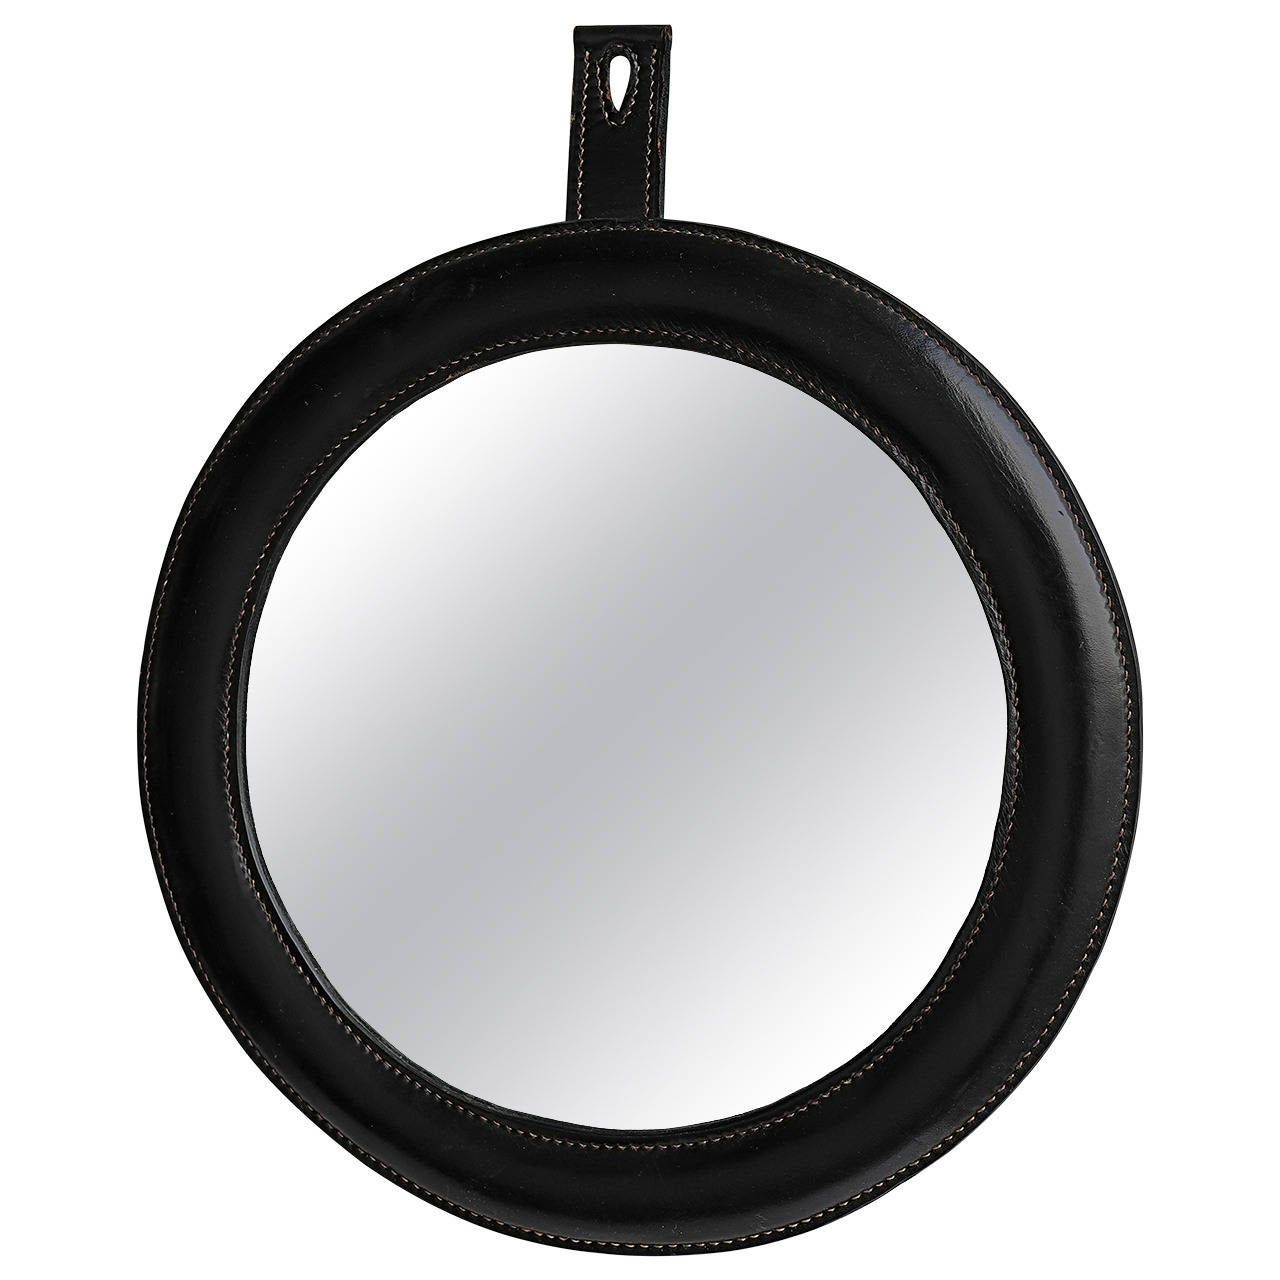 Hand Stitched Black Leather Wall Mirror In Style Of Jacques Adnet For For Black Leather Strap Wall Mirrors (View 12 of 15)